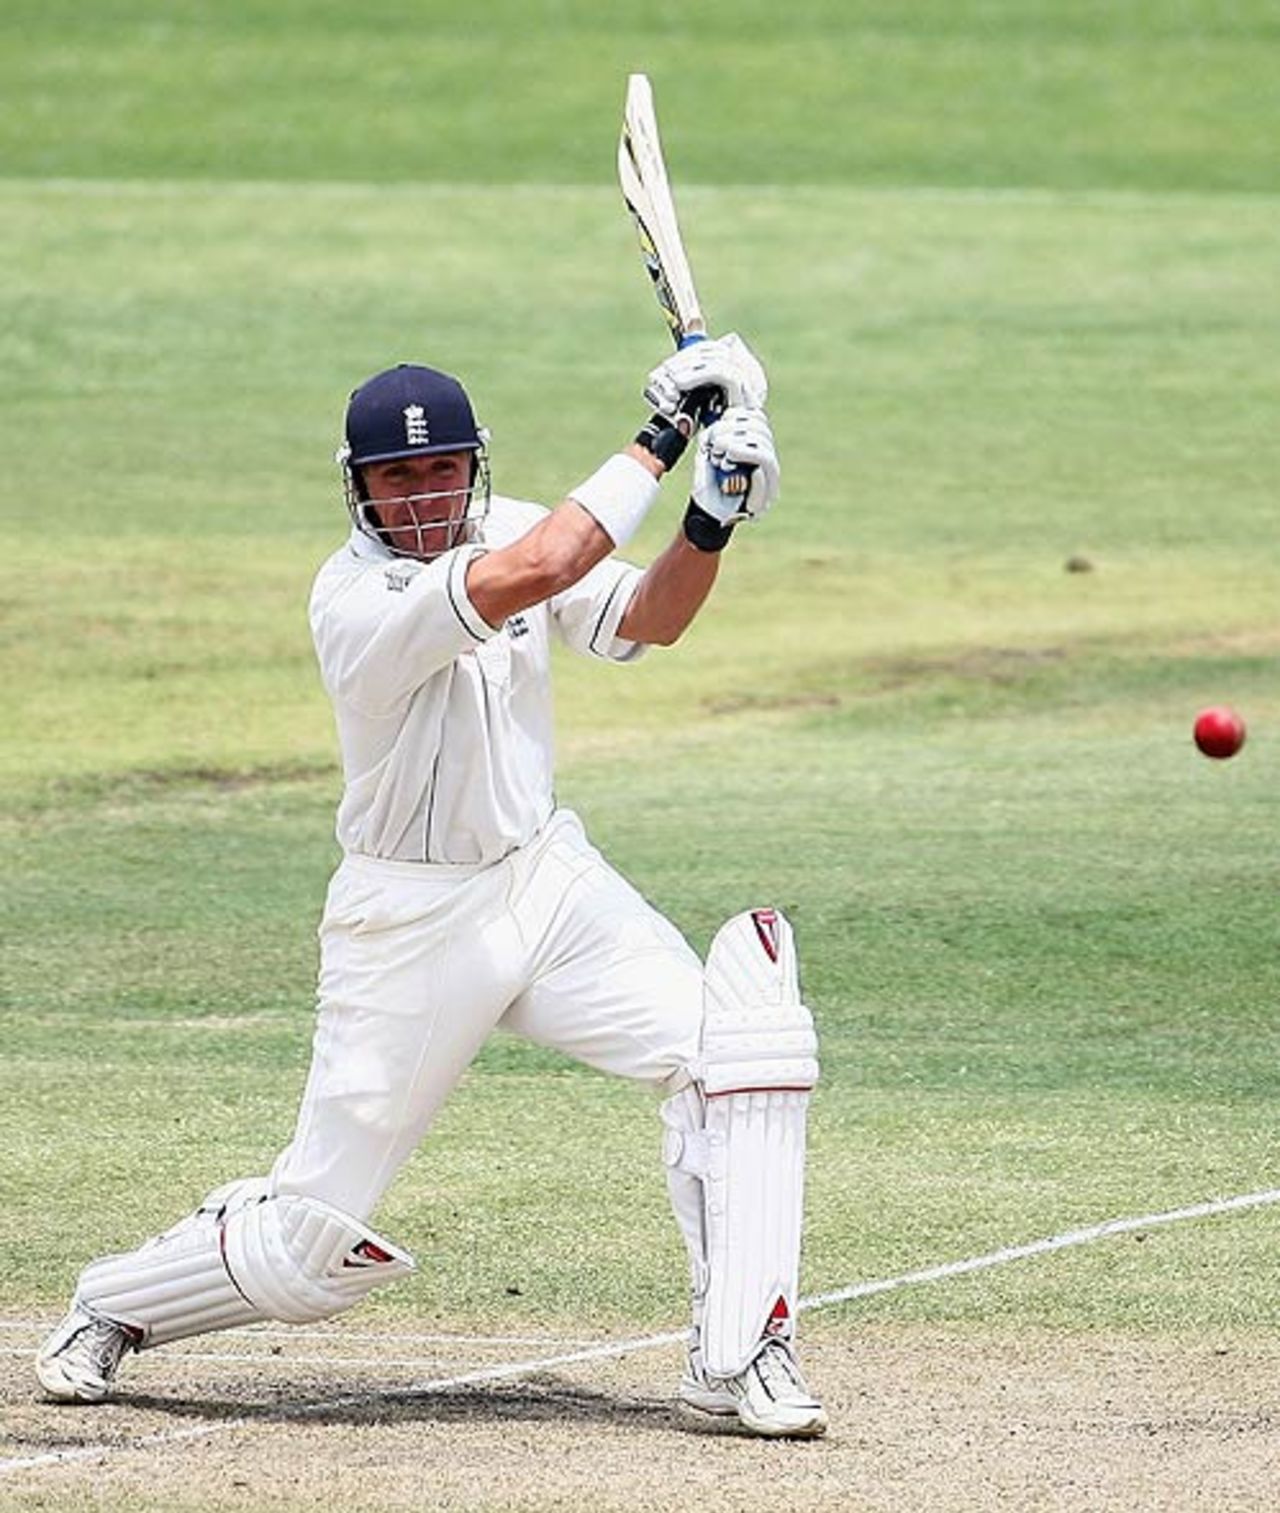 Alec Stewart cover drives during his innings of 69, Cricket Australia Chairman's XI v England XI, Lilac Hill, Perth, December 8, 2006